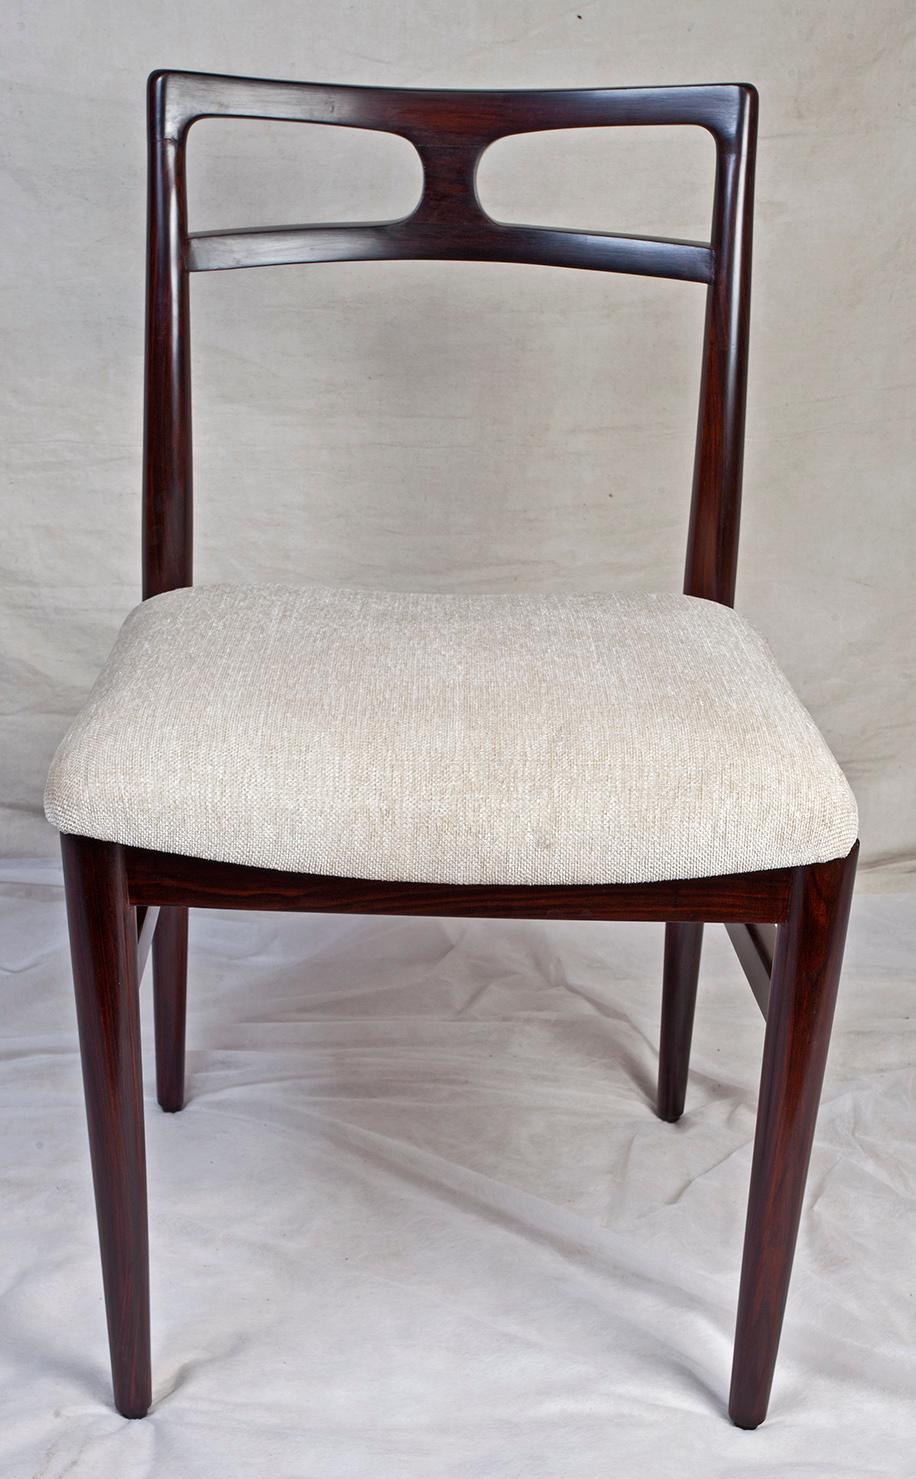 Set of 8 Mid-Century Modern Rosewood Dining Chairs by Johannes Andersen, Denmark 1